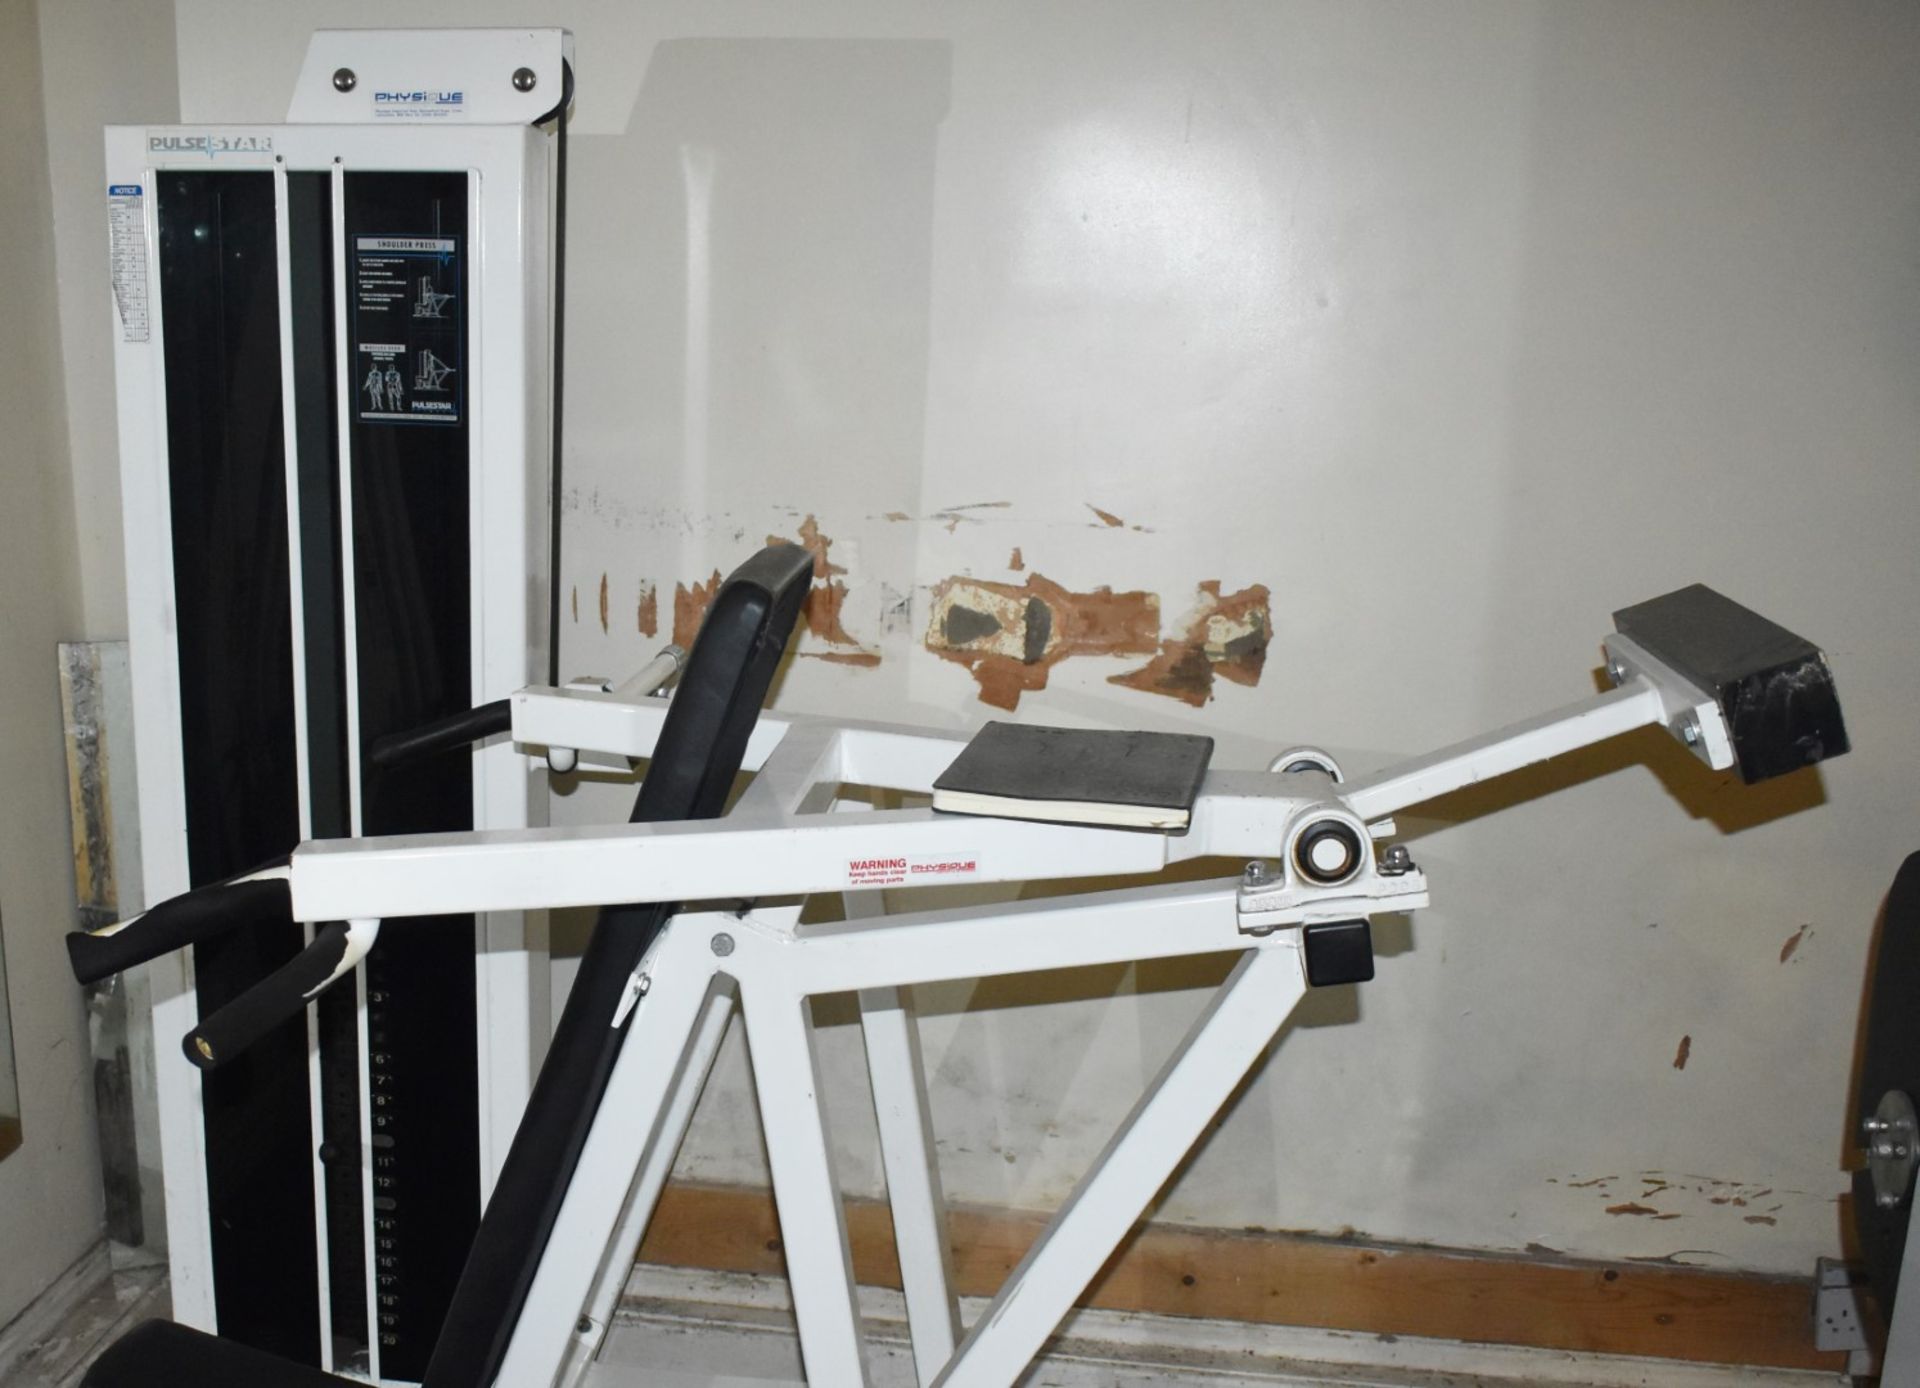 Contents of Bodybuilding and Strongman Gym - Includes Approx 30 Pieces of Gym Equipment, Floor Mats, - Image 21 of 95